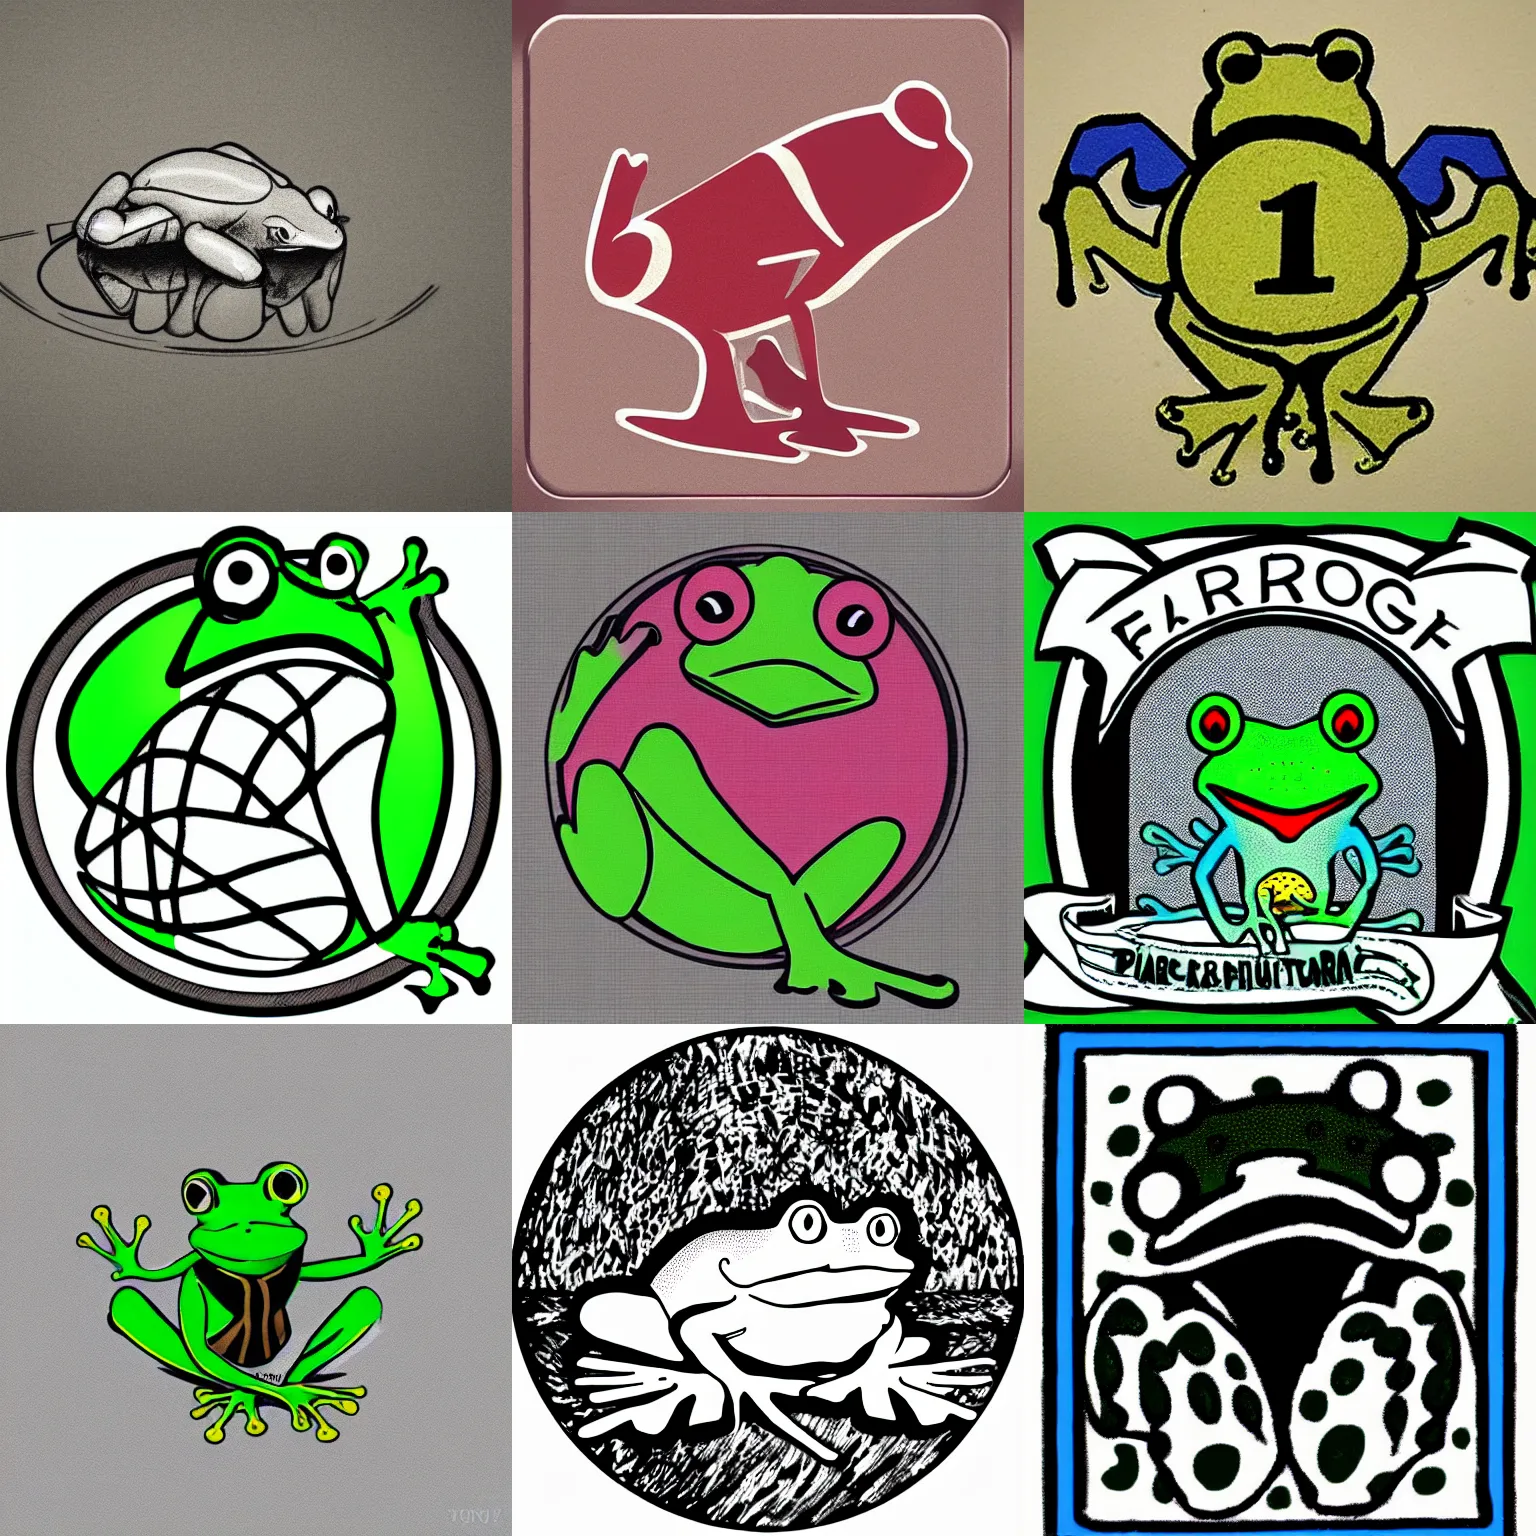 Prompt: a frog, modern pictoral art, iconic logo, symbolic